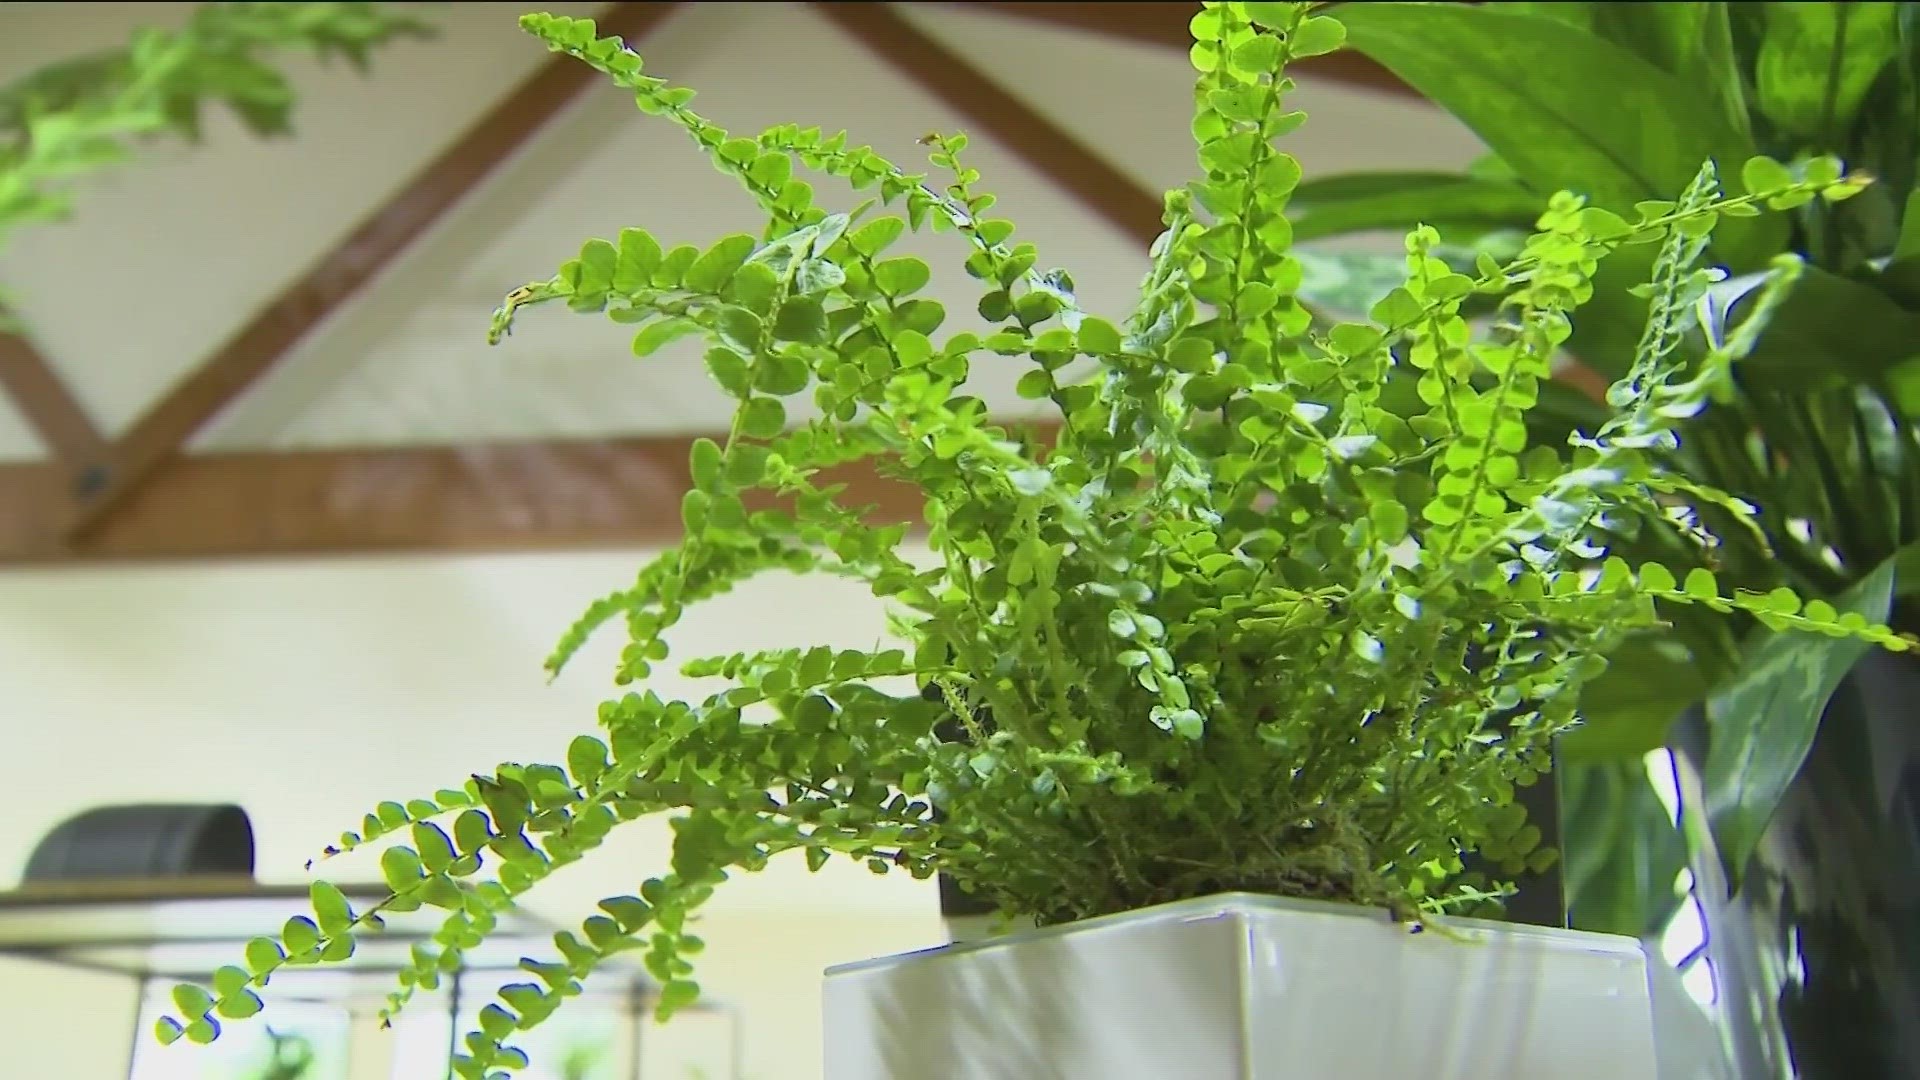 KTVB's Jim Duthie takes a trip to Greenscapes Boutique in Boise to get an idea of the wide variety of beautiful plants you might consider growing in your own home.